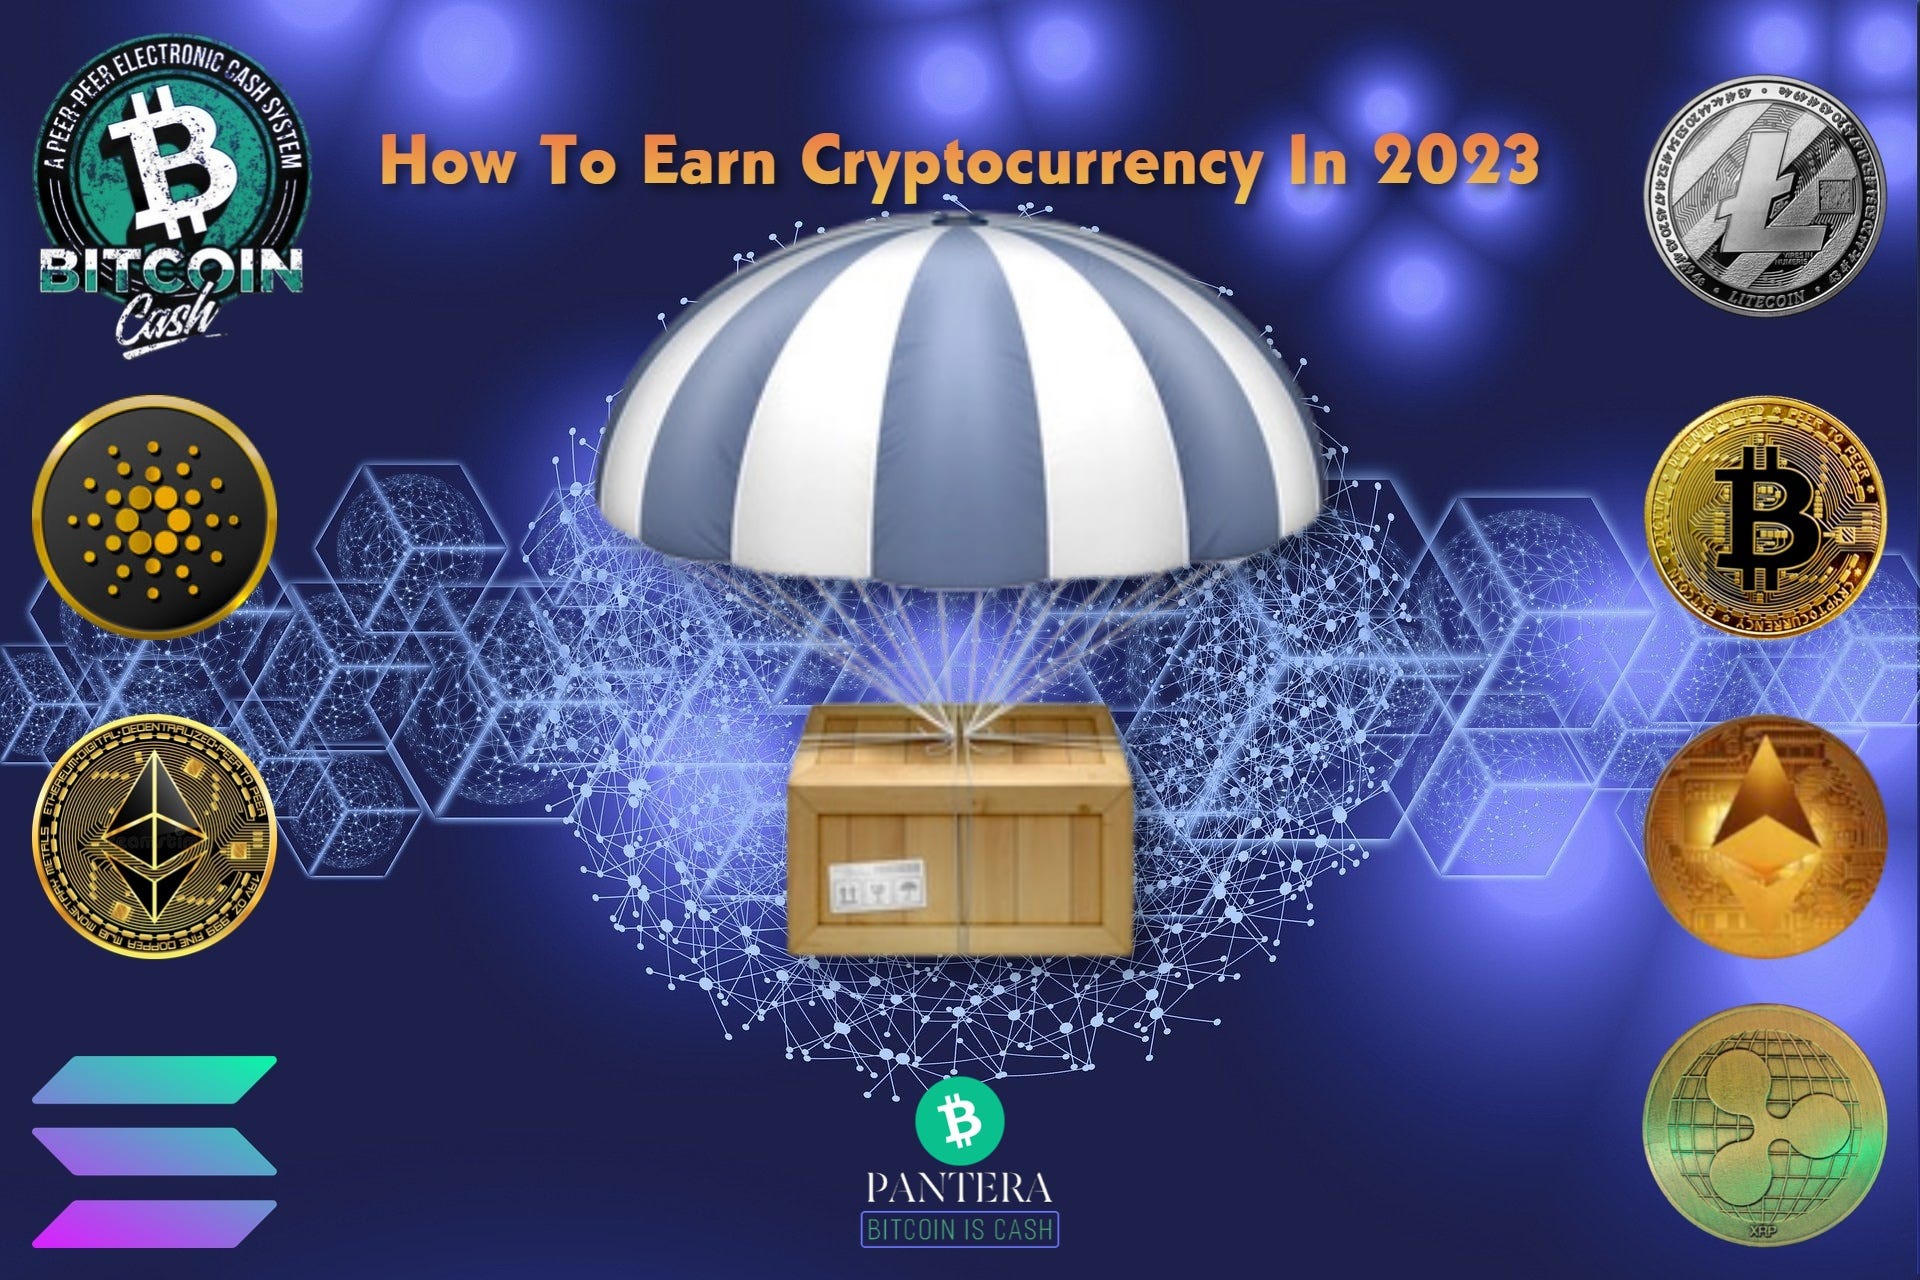 Here’s How To Earn Cryptocurrency In 2023 With No Investment